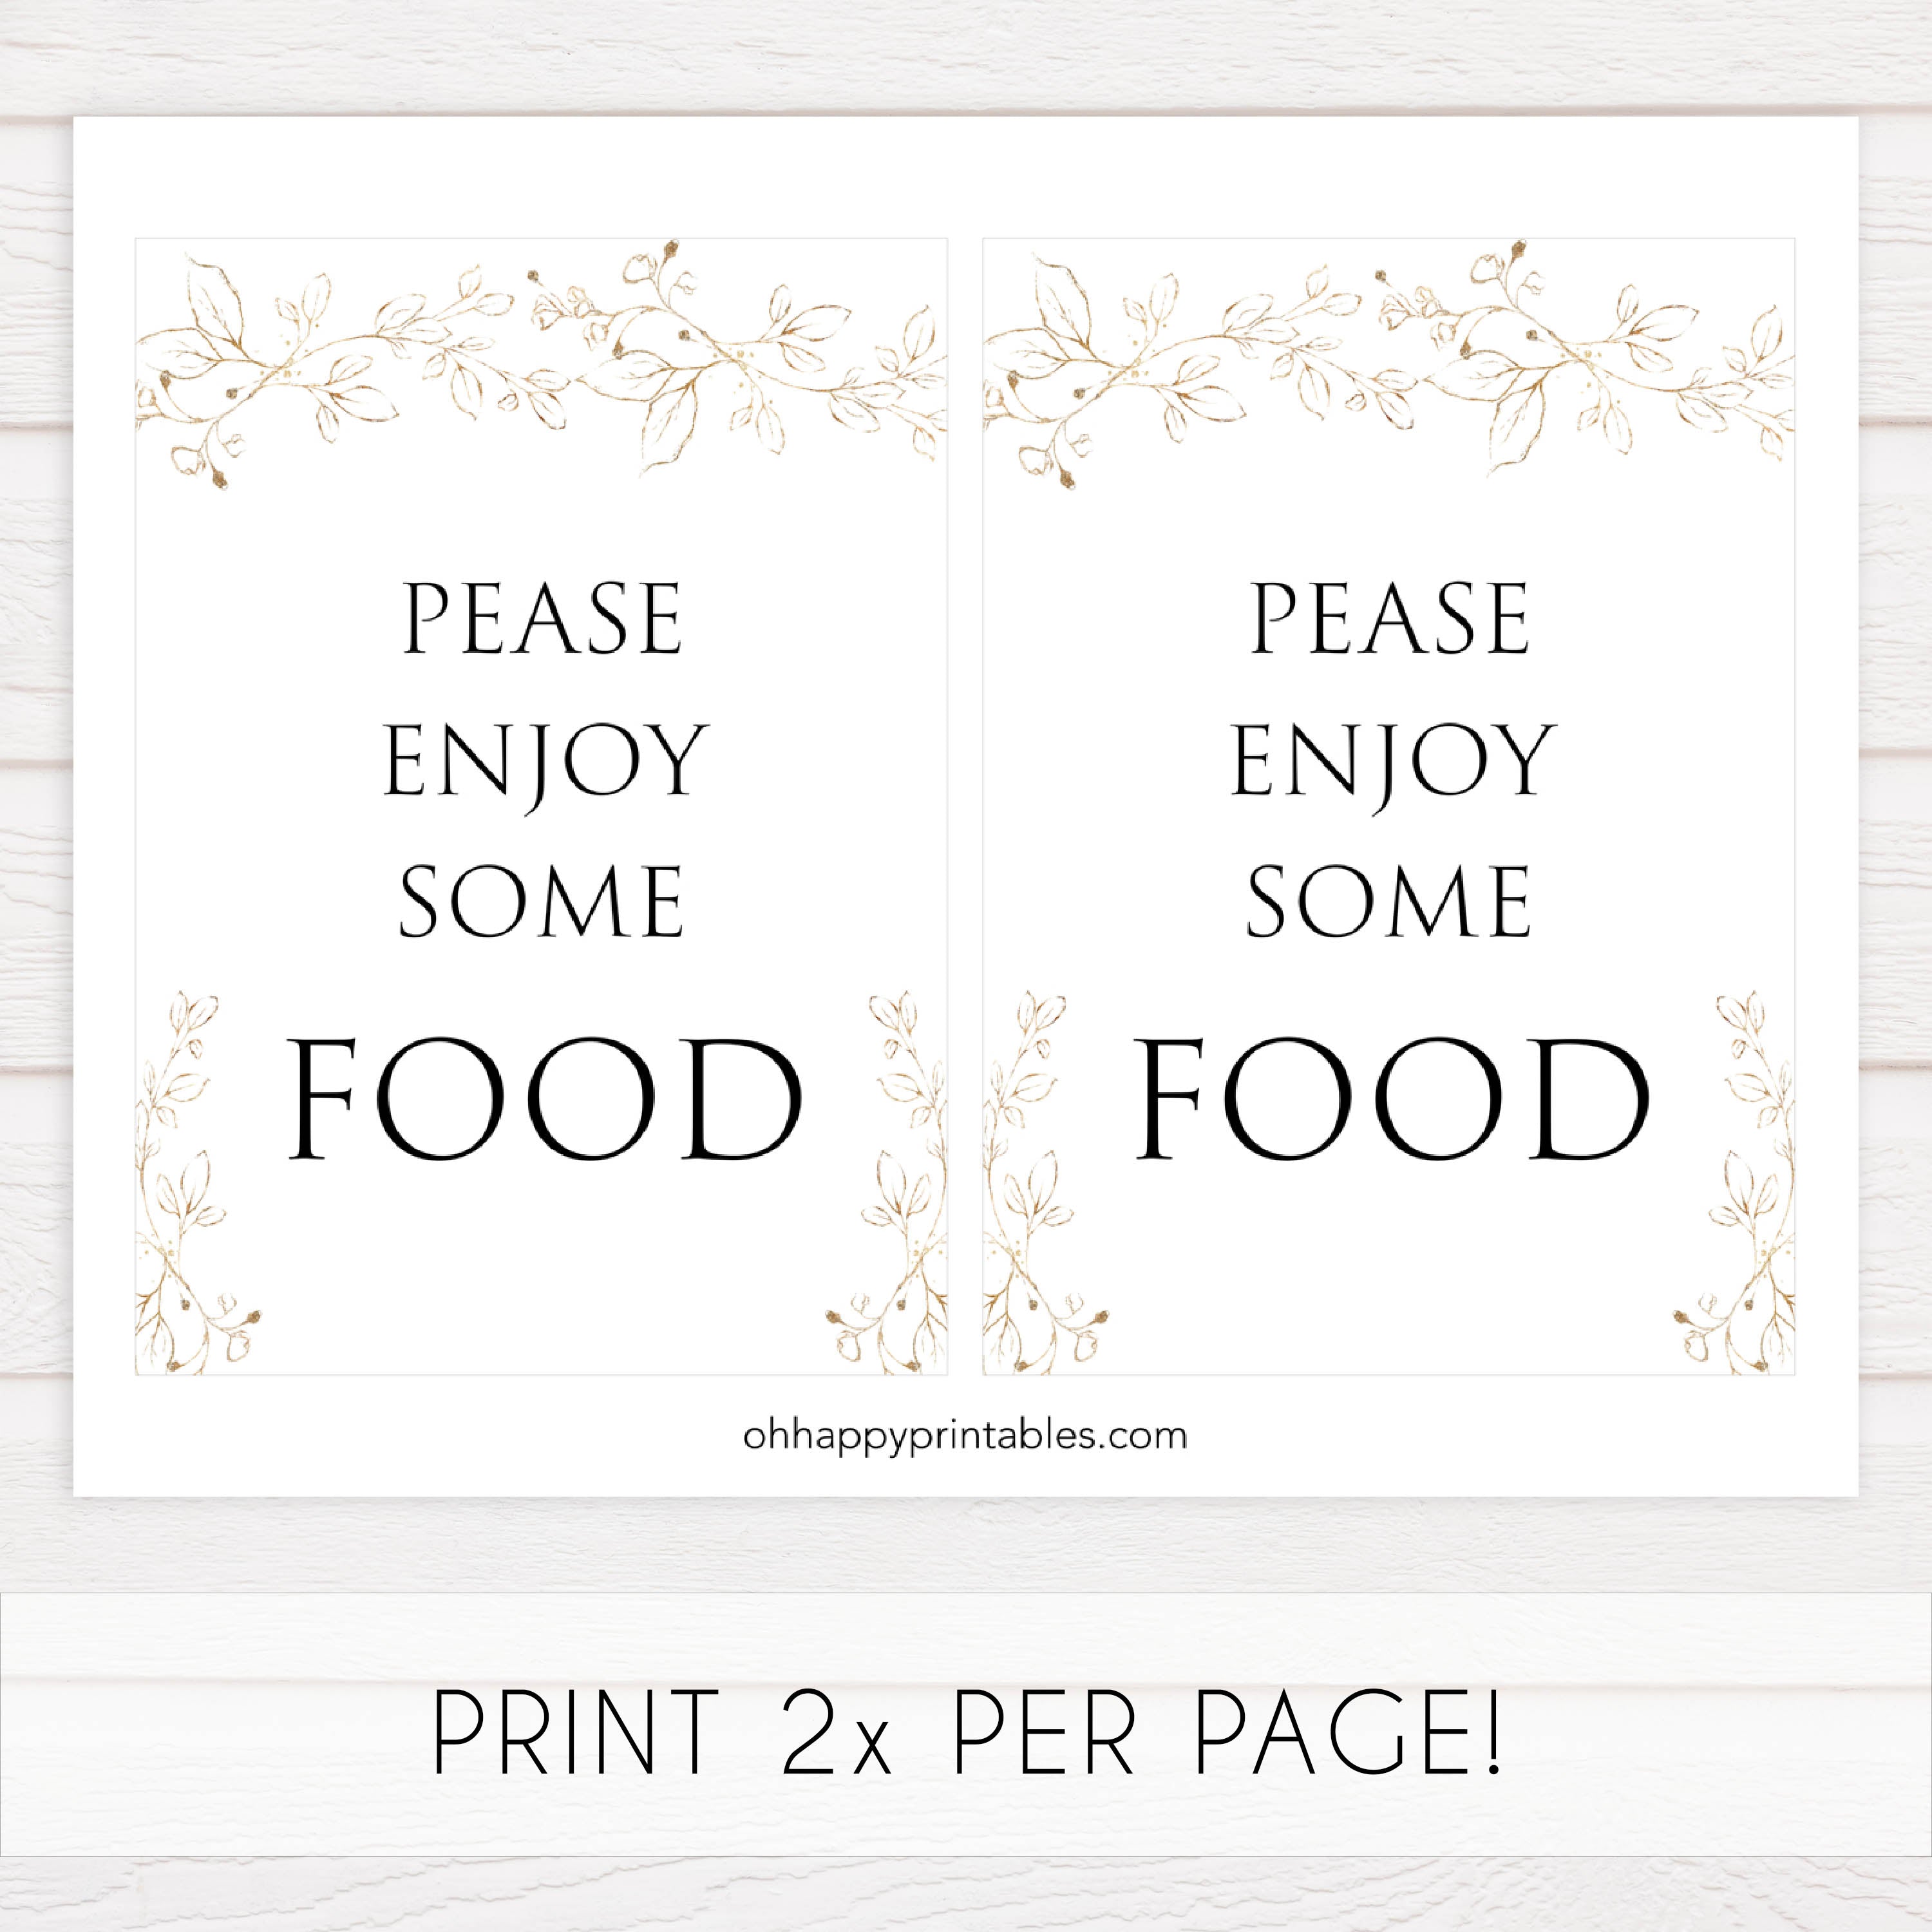 food table sign, Printable baby shower games, gold leaf baby games, baby shower games, fun baby shower ideas, top baby shower ideas, gold leaf baby shower, baby shower games, fun gold leaf baby shower ideas